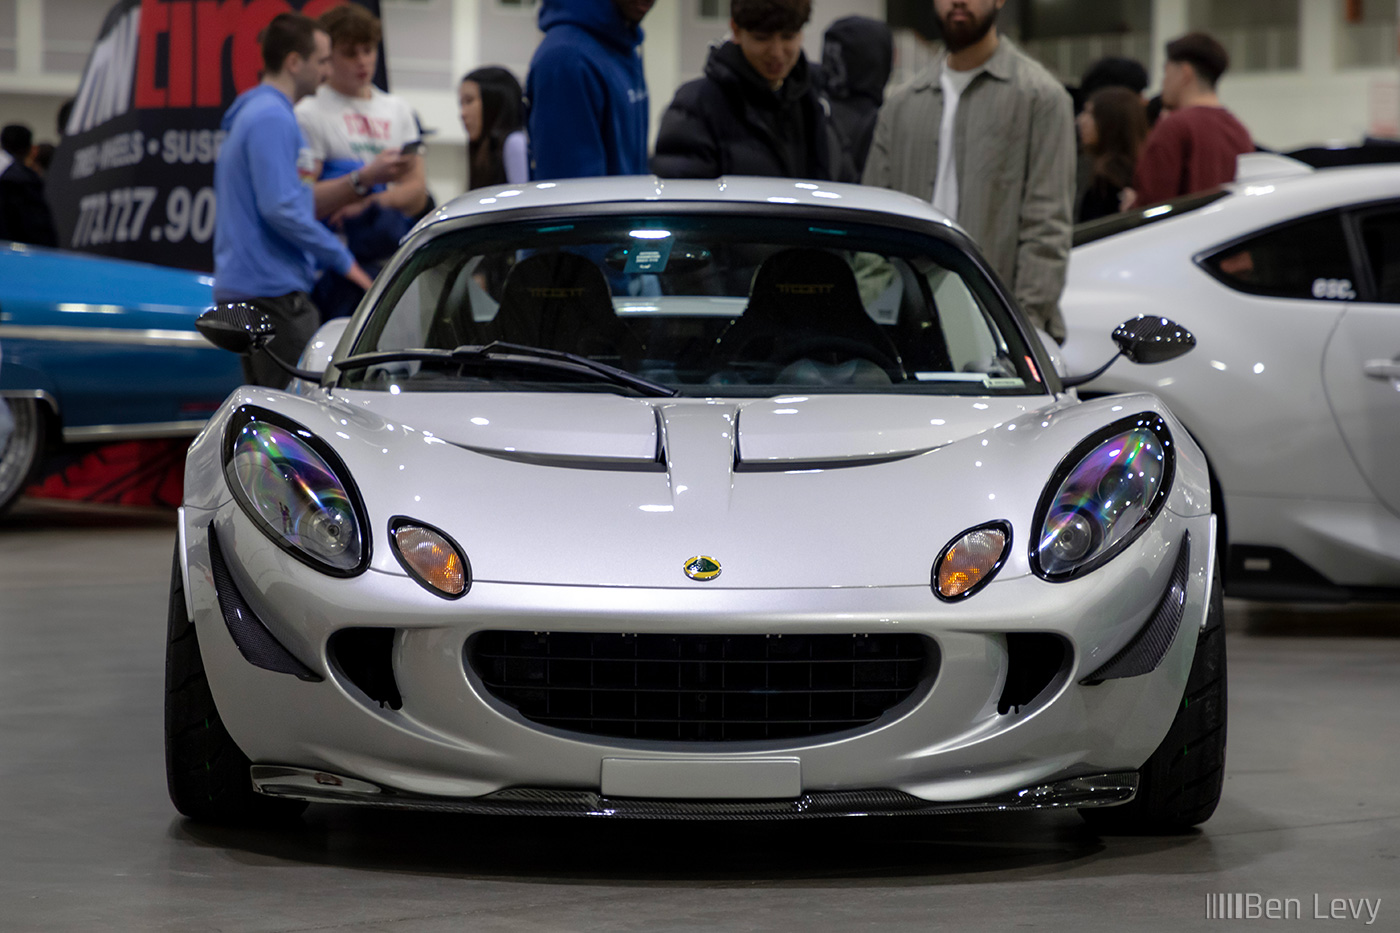 Front of Silver Lotus Elise